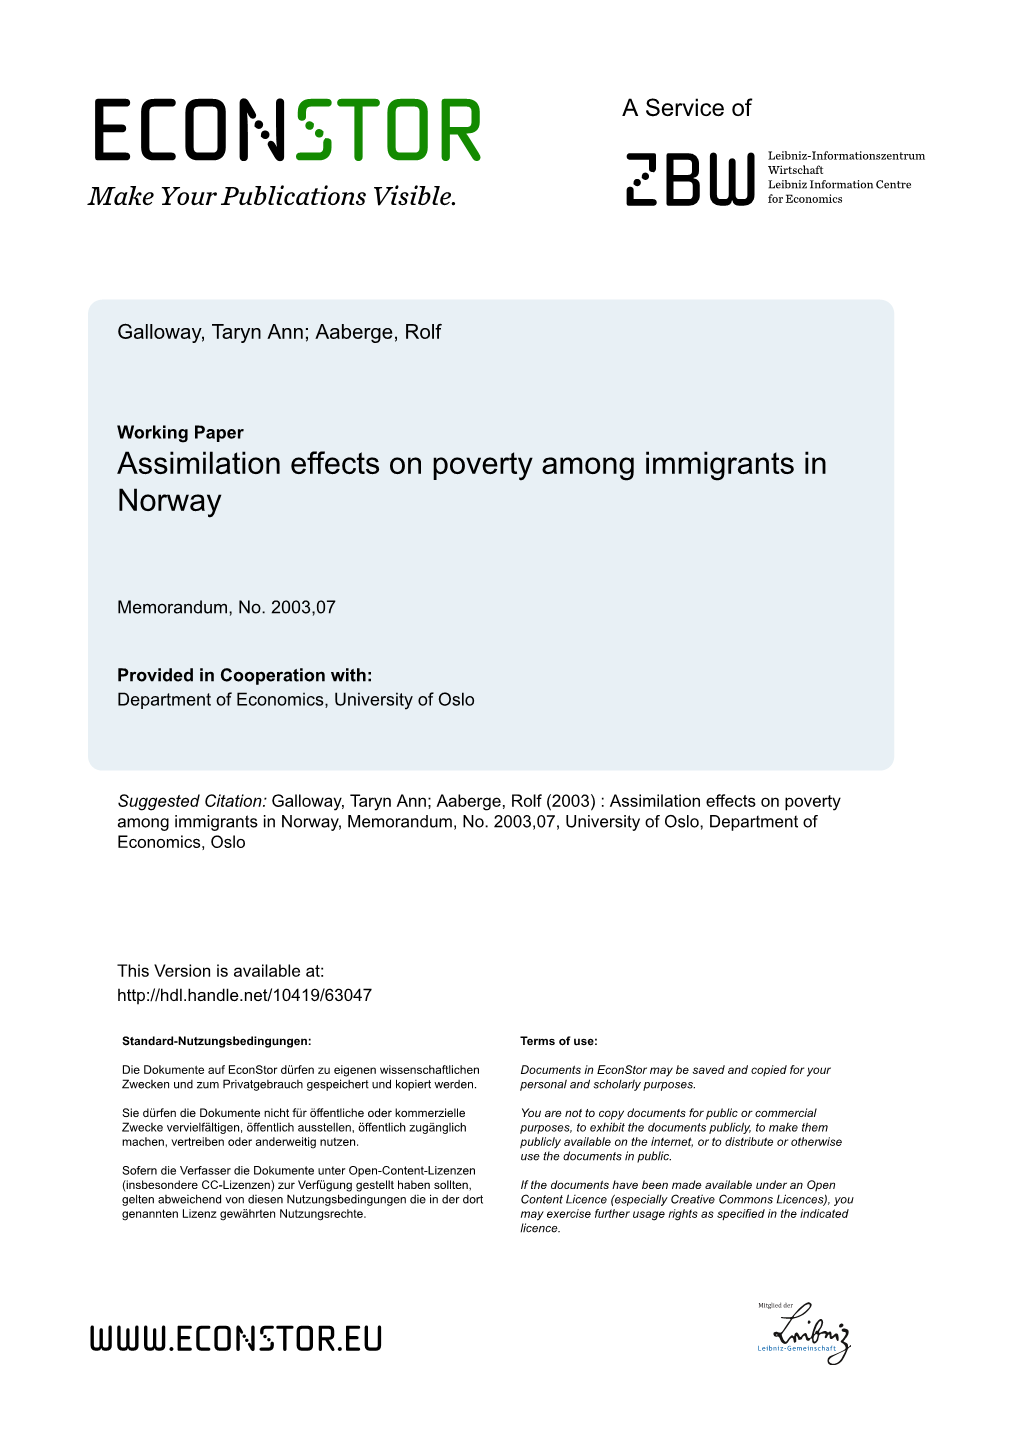 Assimilation Effects on Poverty Among Immigrants in Norway